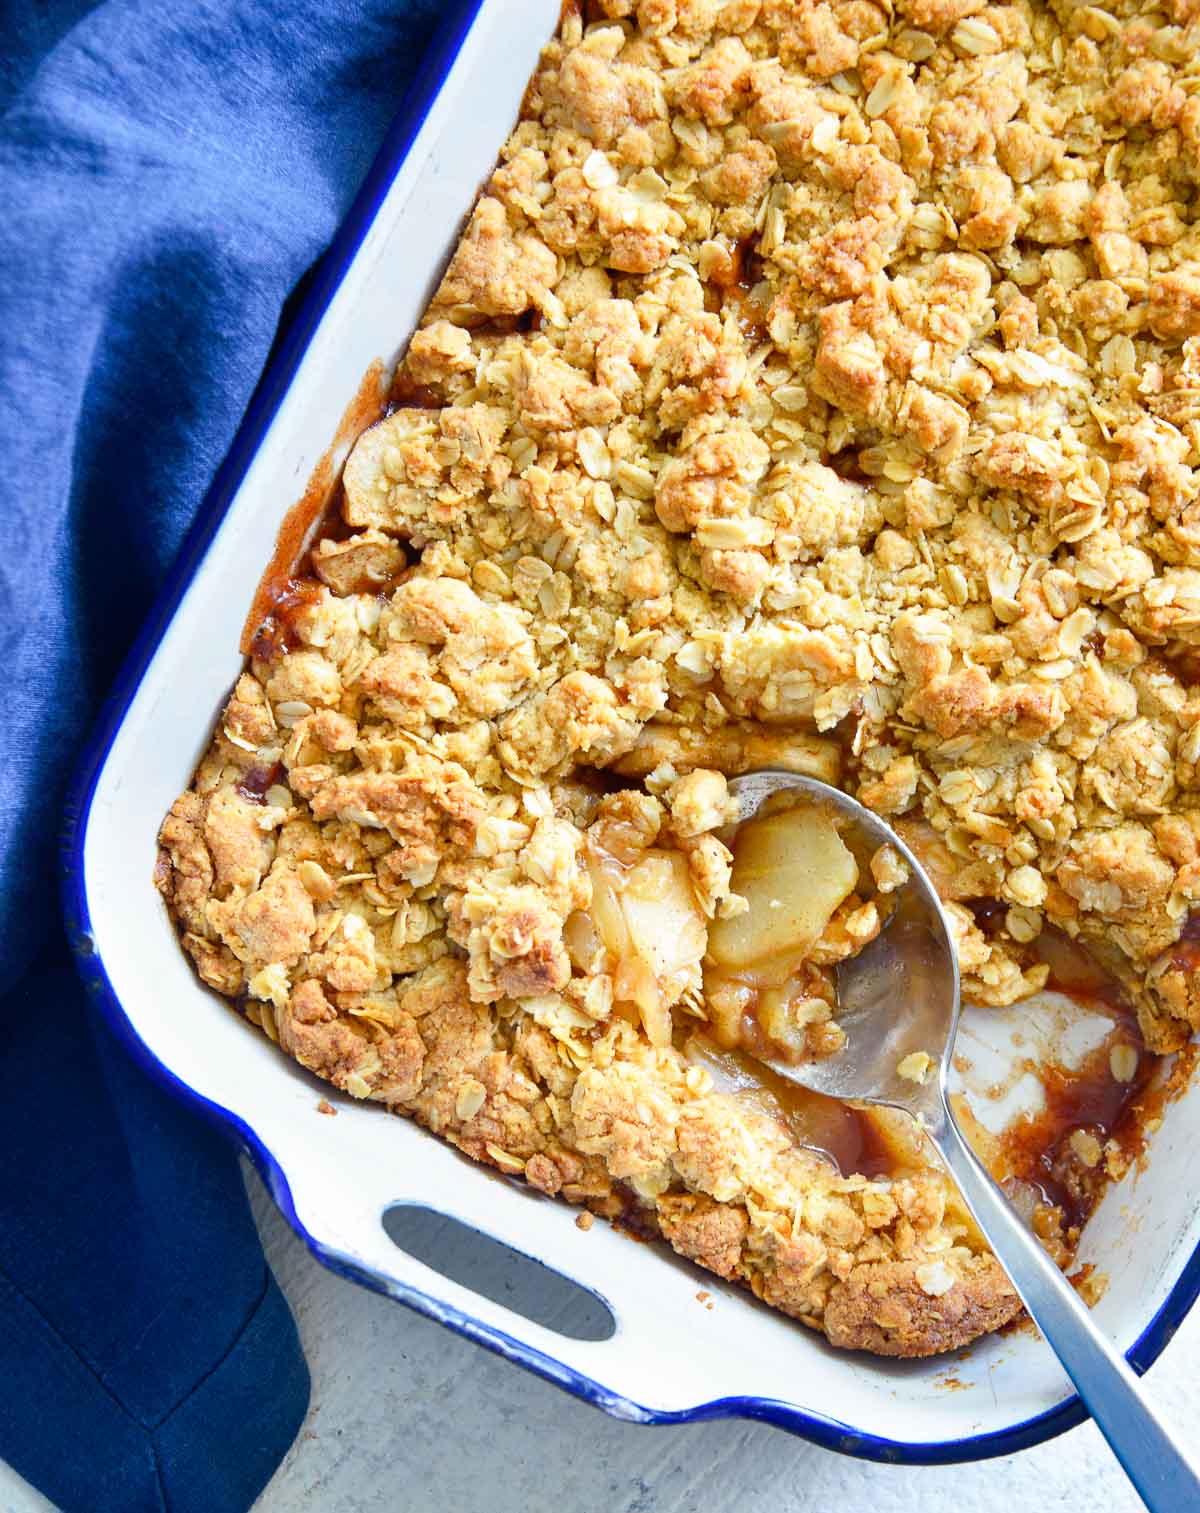 Dish or baked apple crisp with a spoon in it